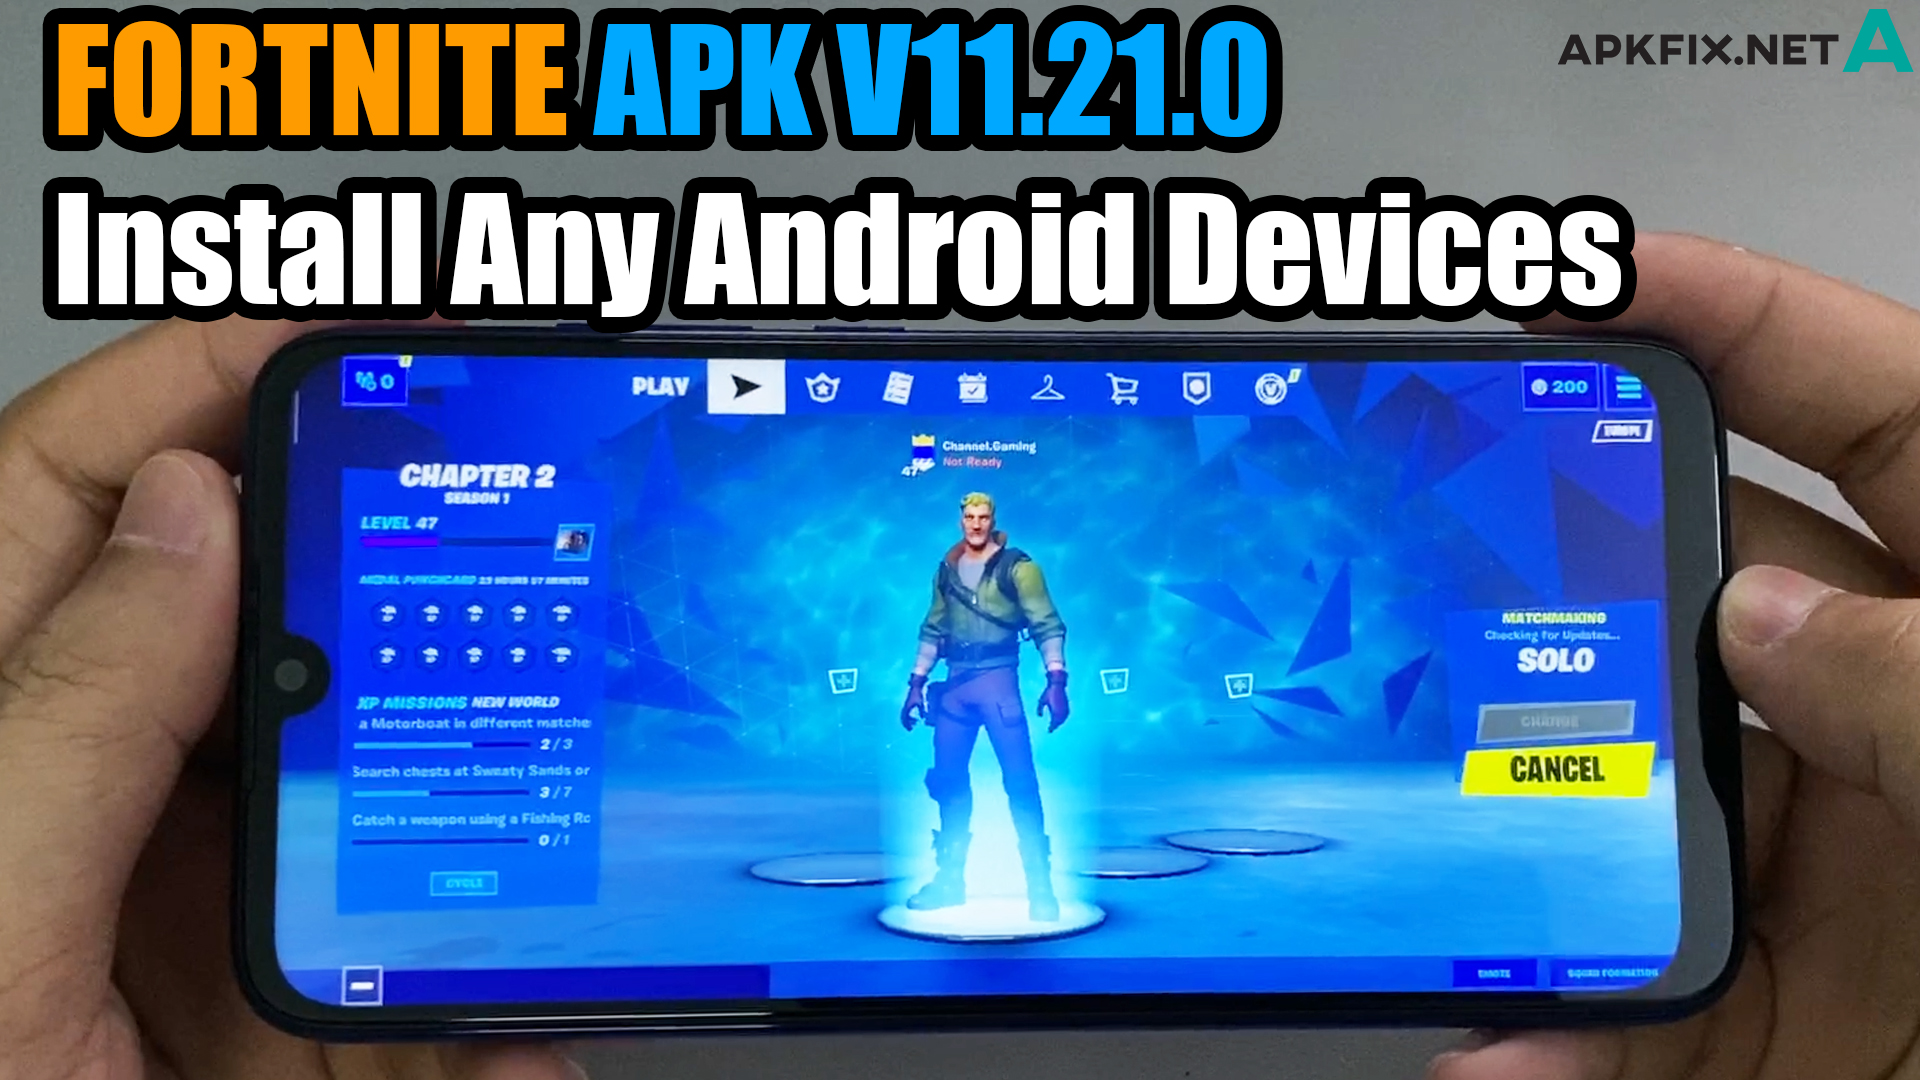 Fortnite Apk Compatible With Any Device Fortnite V11 21 0 Install Any Android Fix Device Not Supported Apk Fix